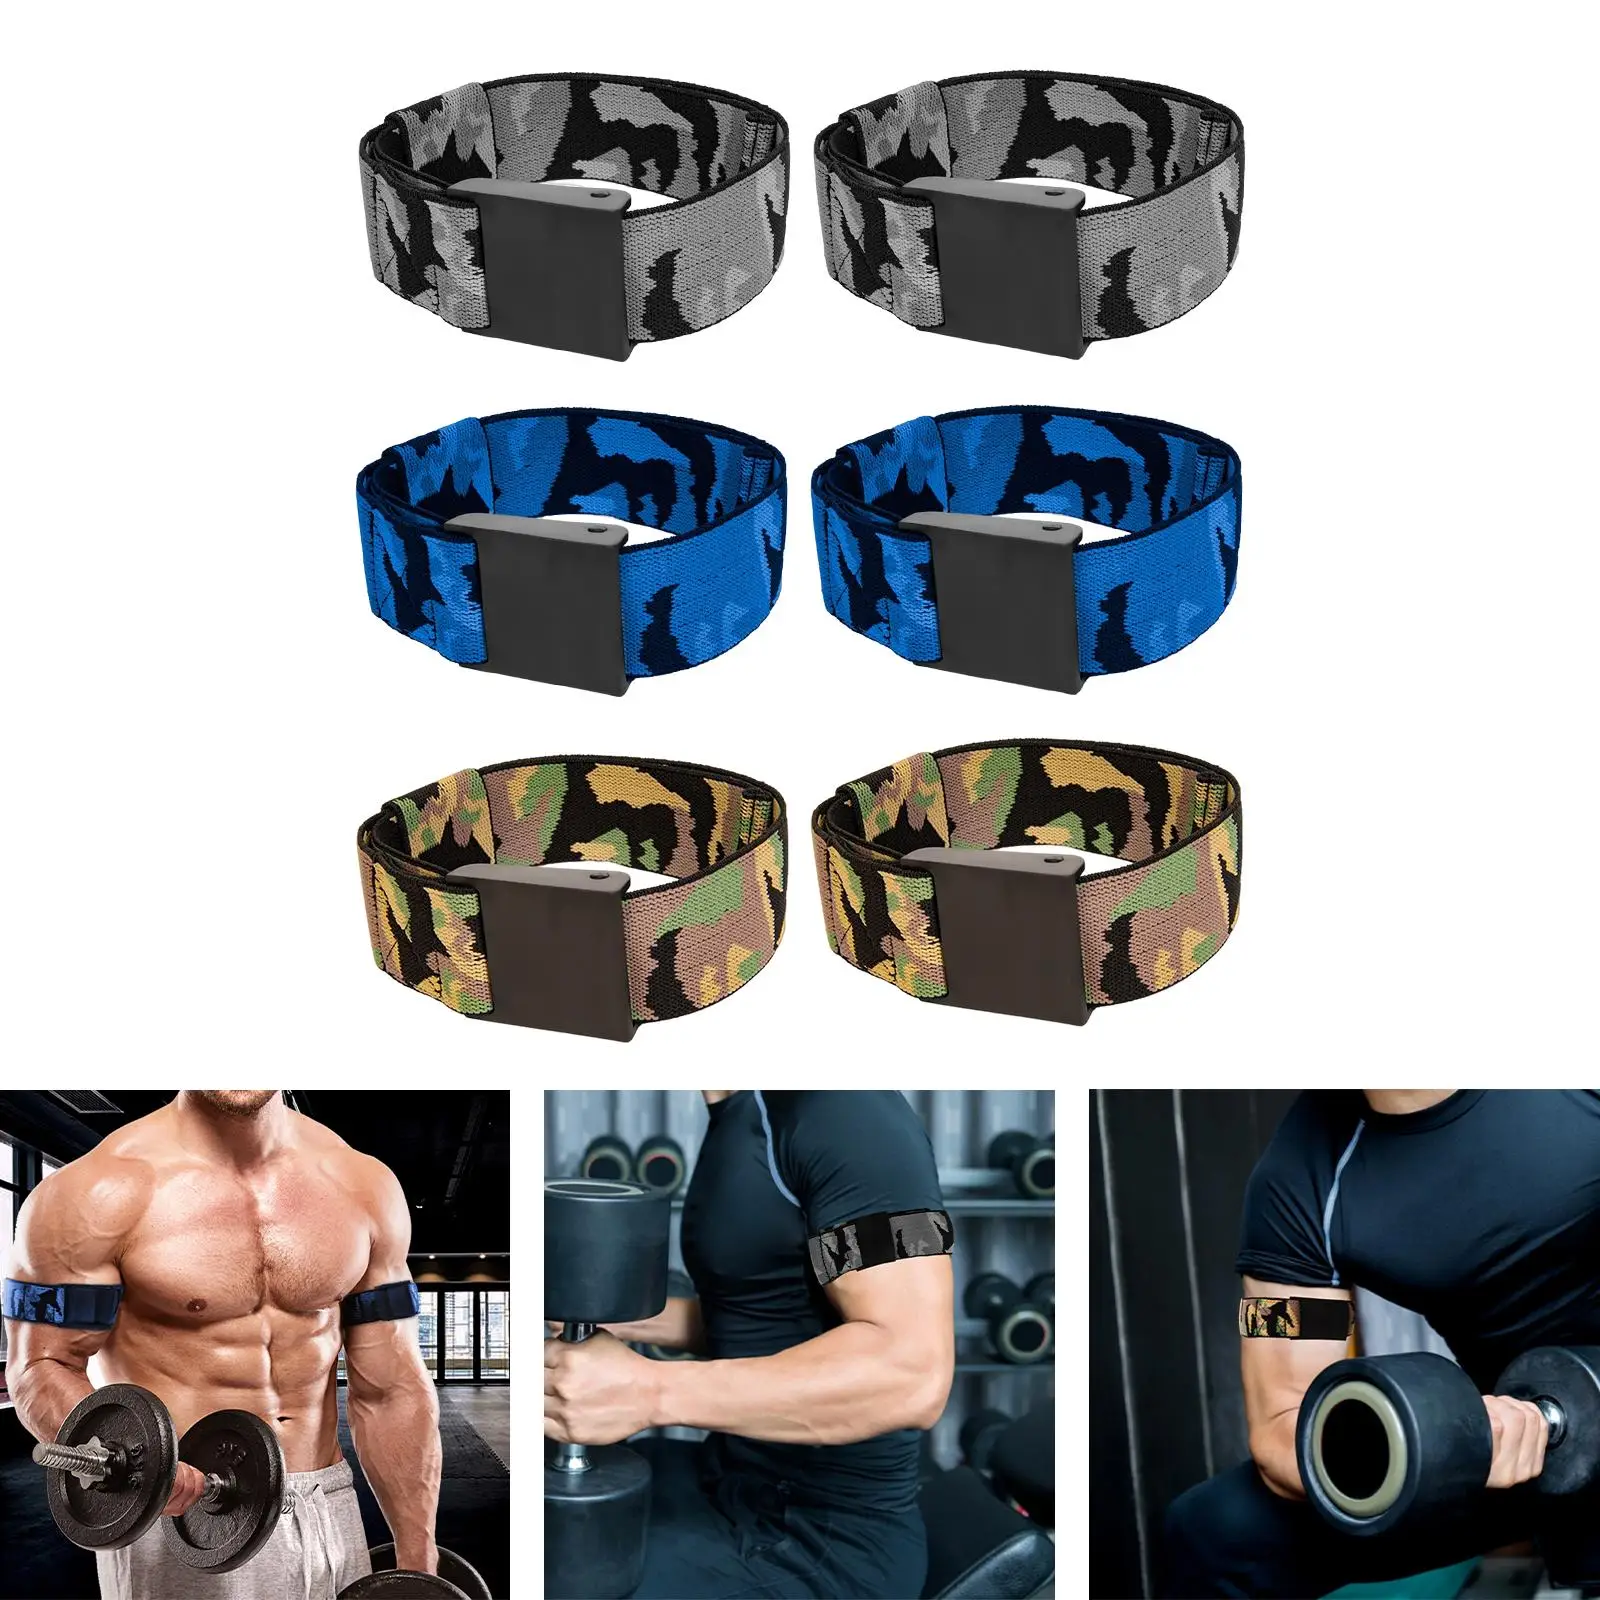 Occlusion Bands Arm Bands Strength Training Quick Release Elastic